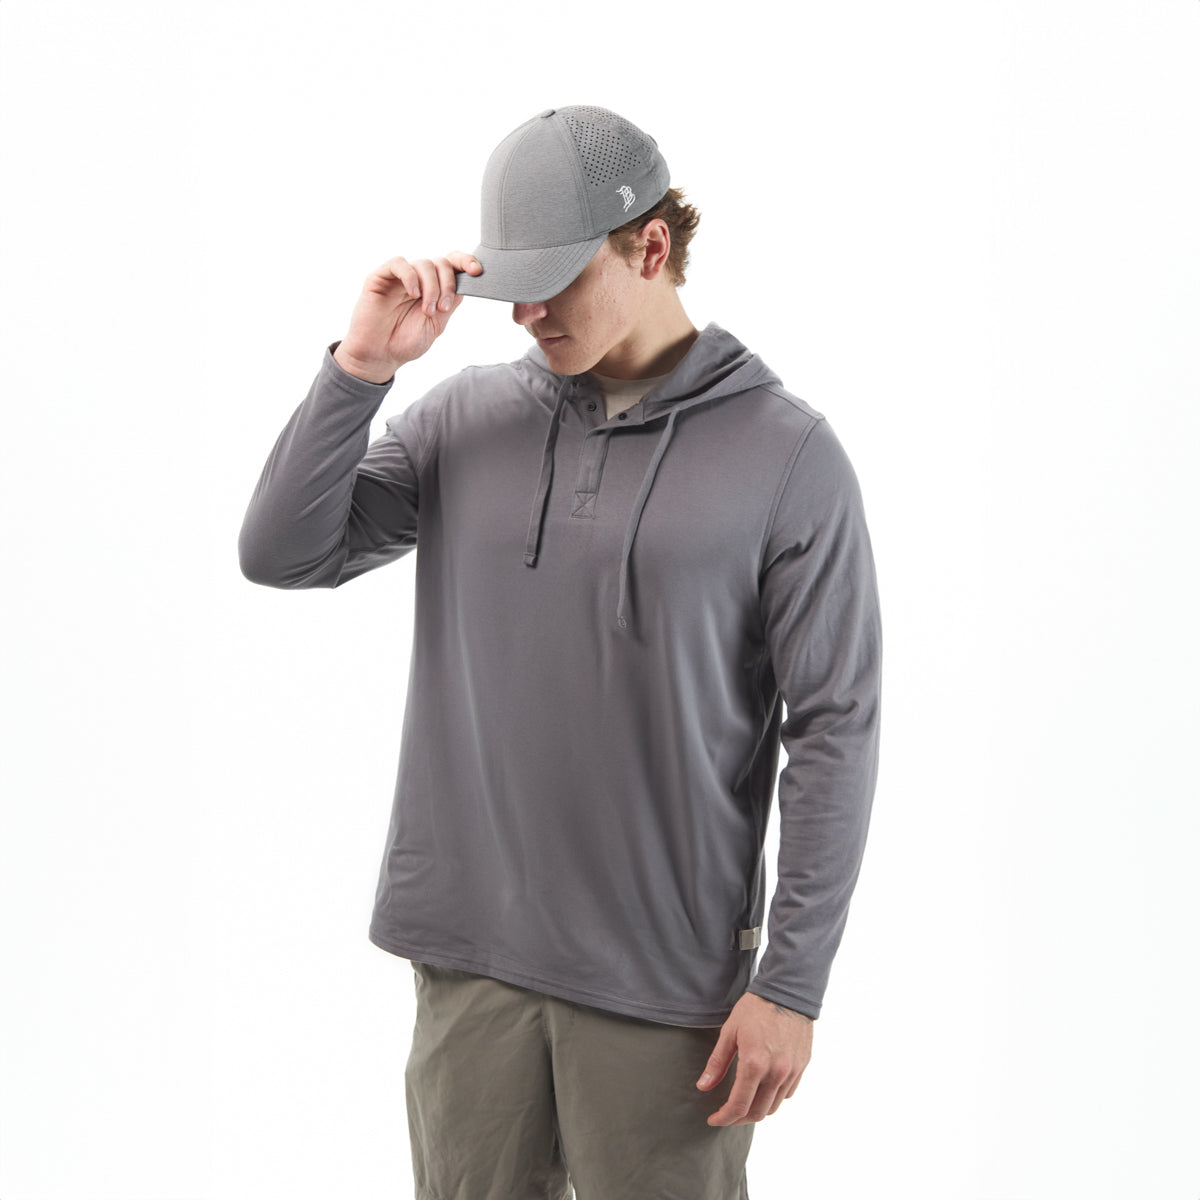 Bare Curved Performance Lifestyle Heather Gray